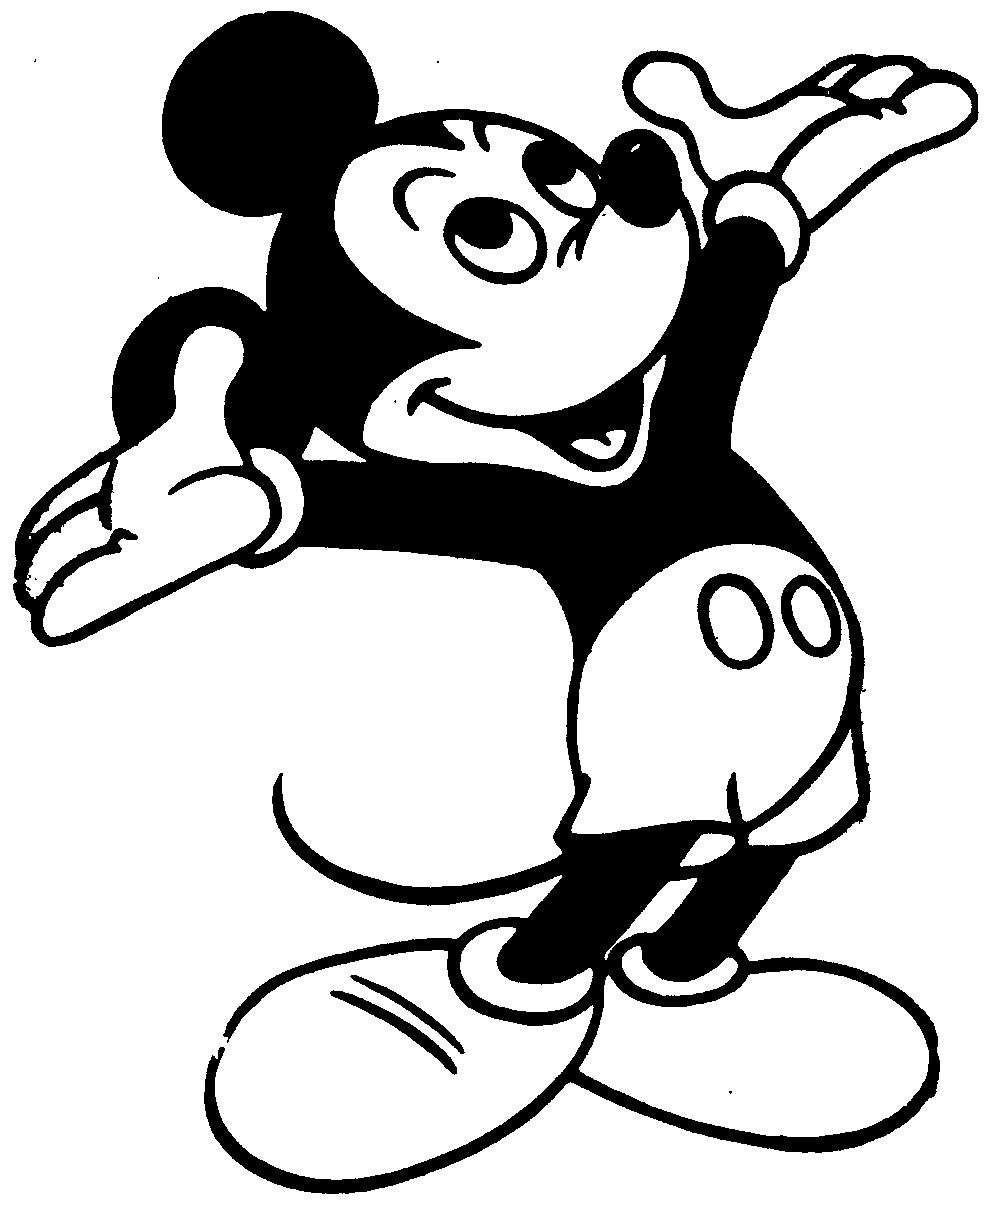 Clip Arts Related To : Mano Mickey Png Netflix And Chill. view all Black An...